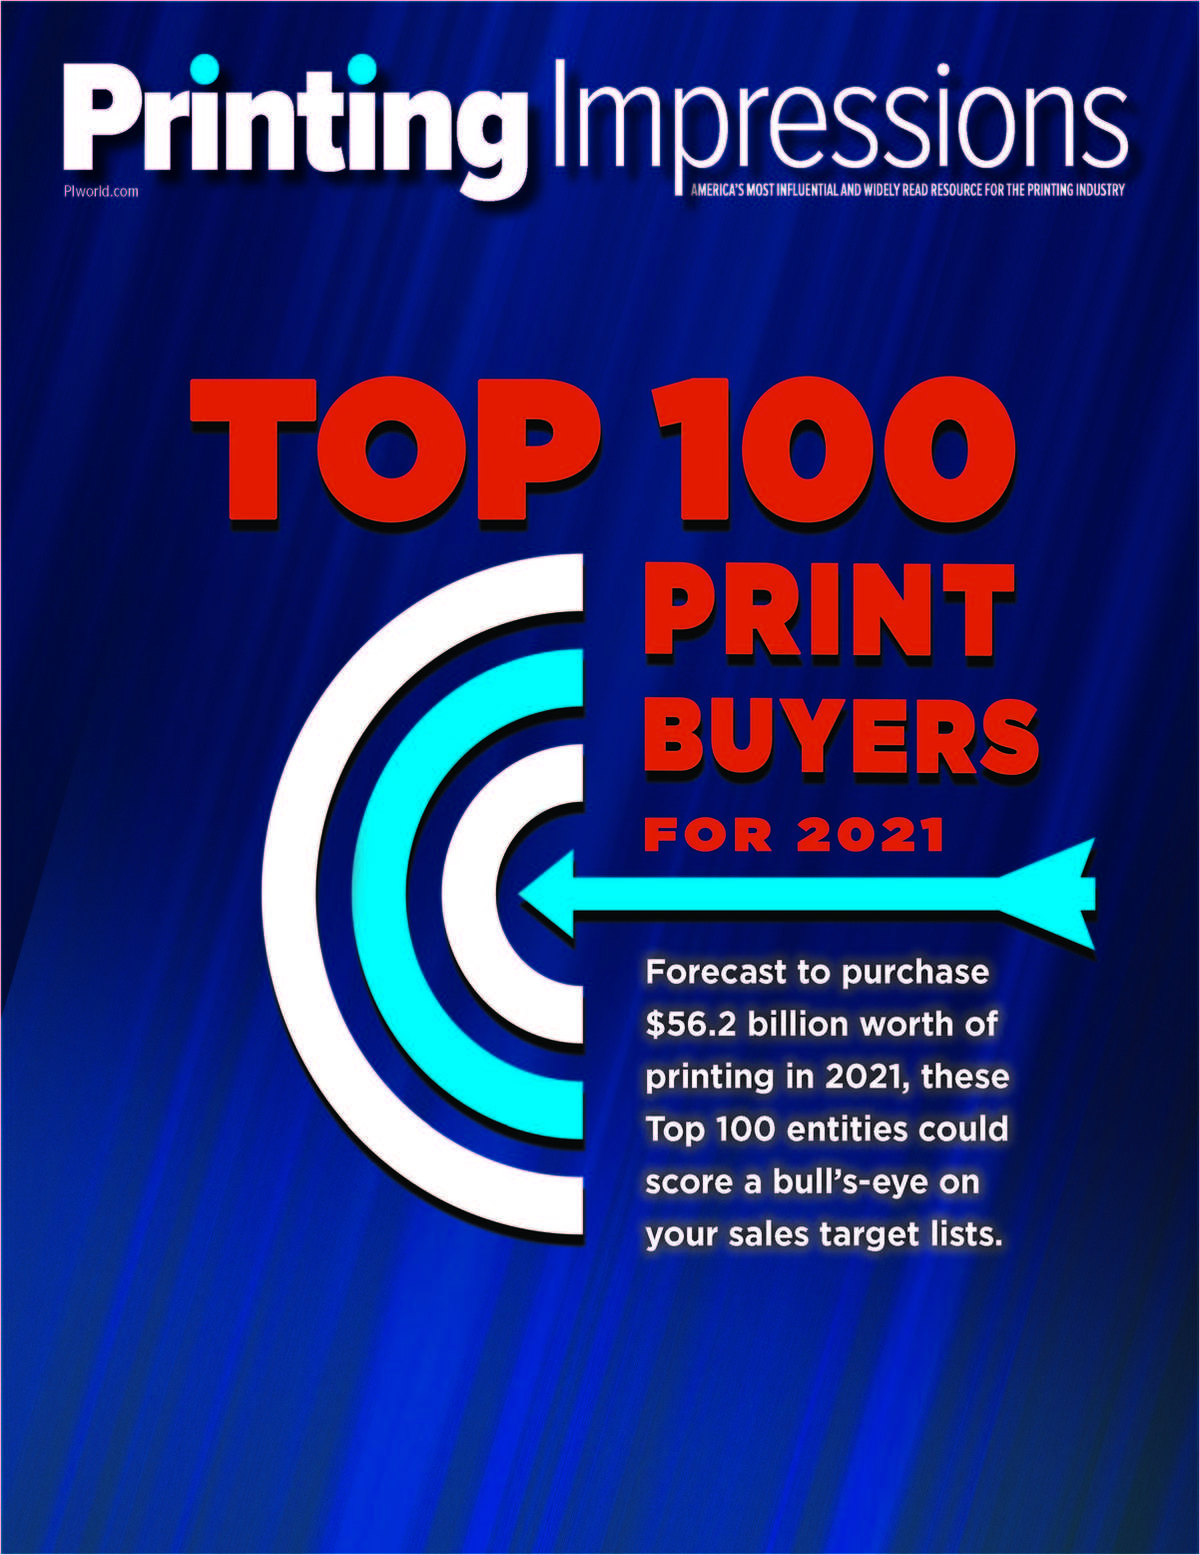 Top 100 Print Buyers Forecasted for 2021